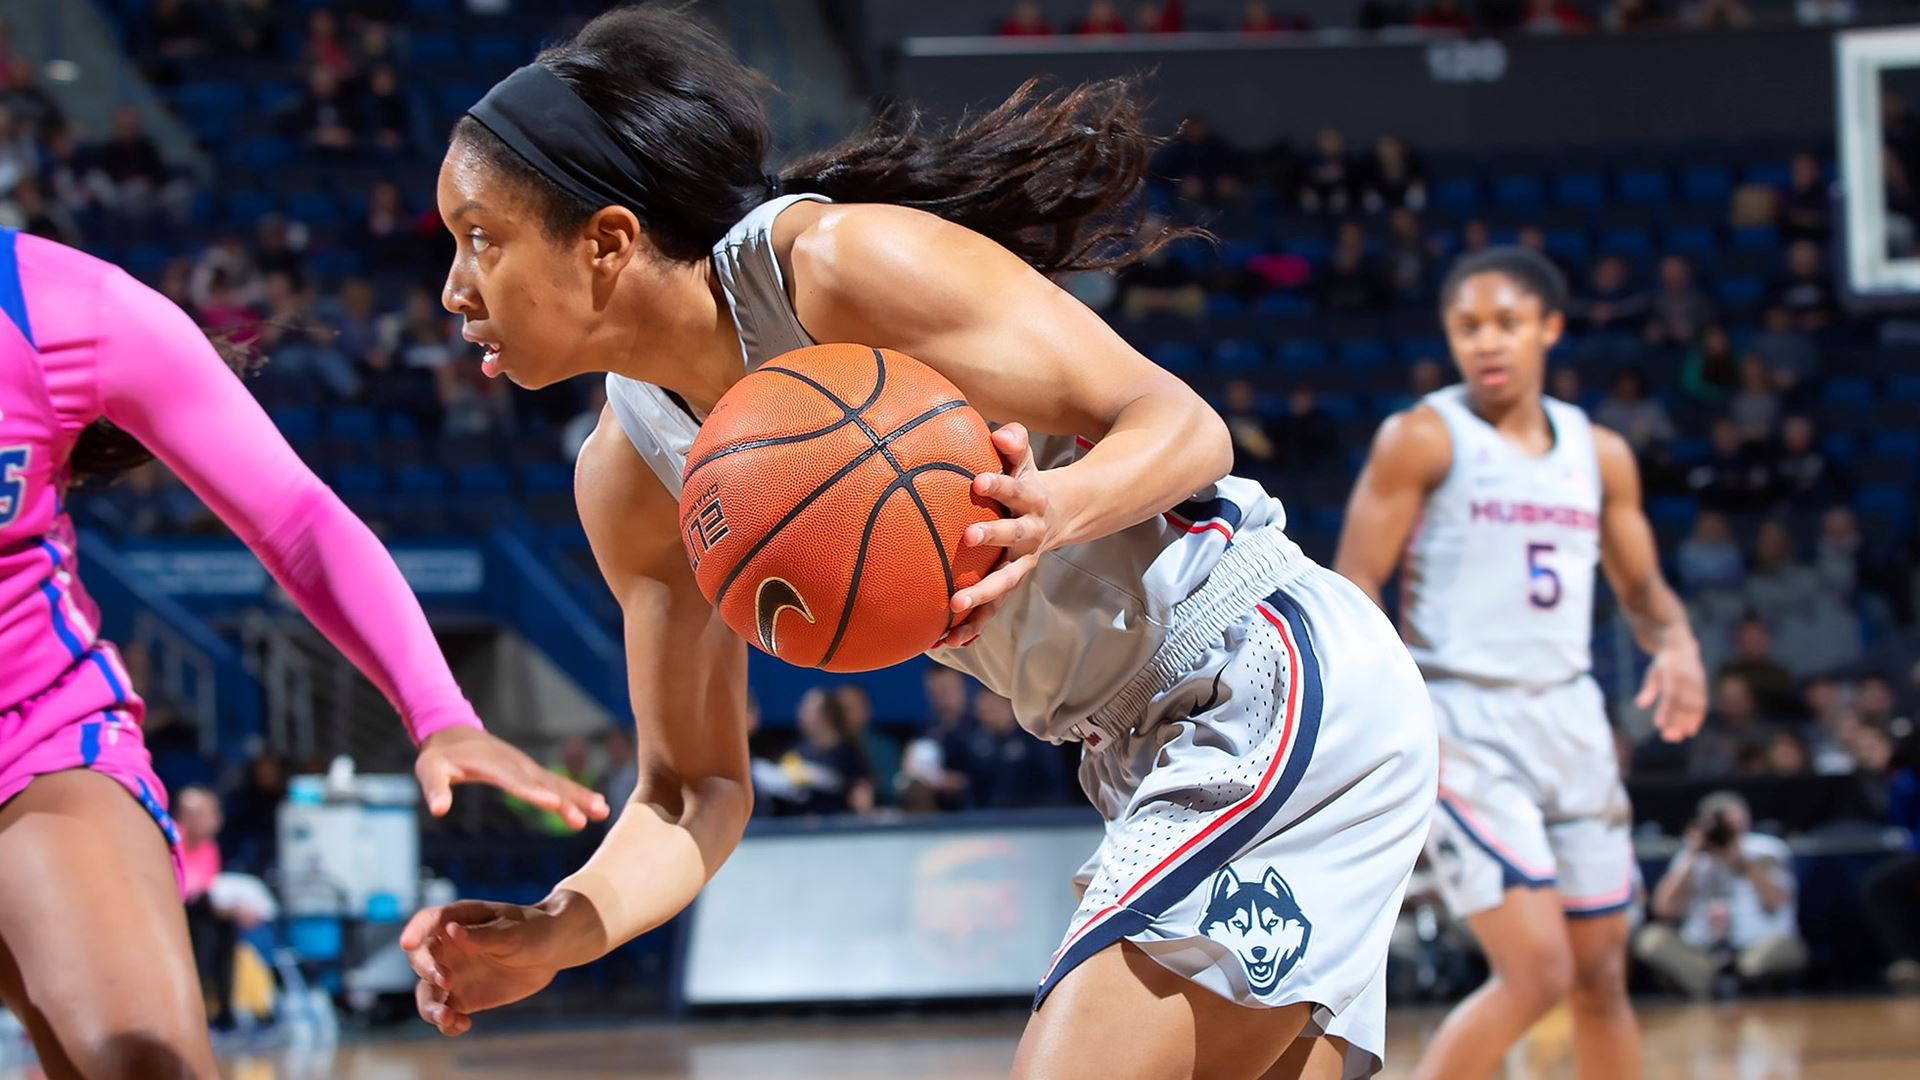 Coombs Transfer From Uconn Huskies Women S Basketball Team The Capital Sports Report